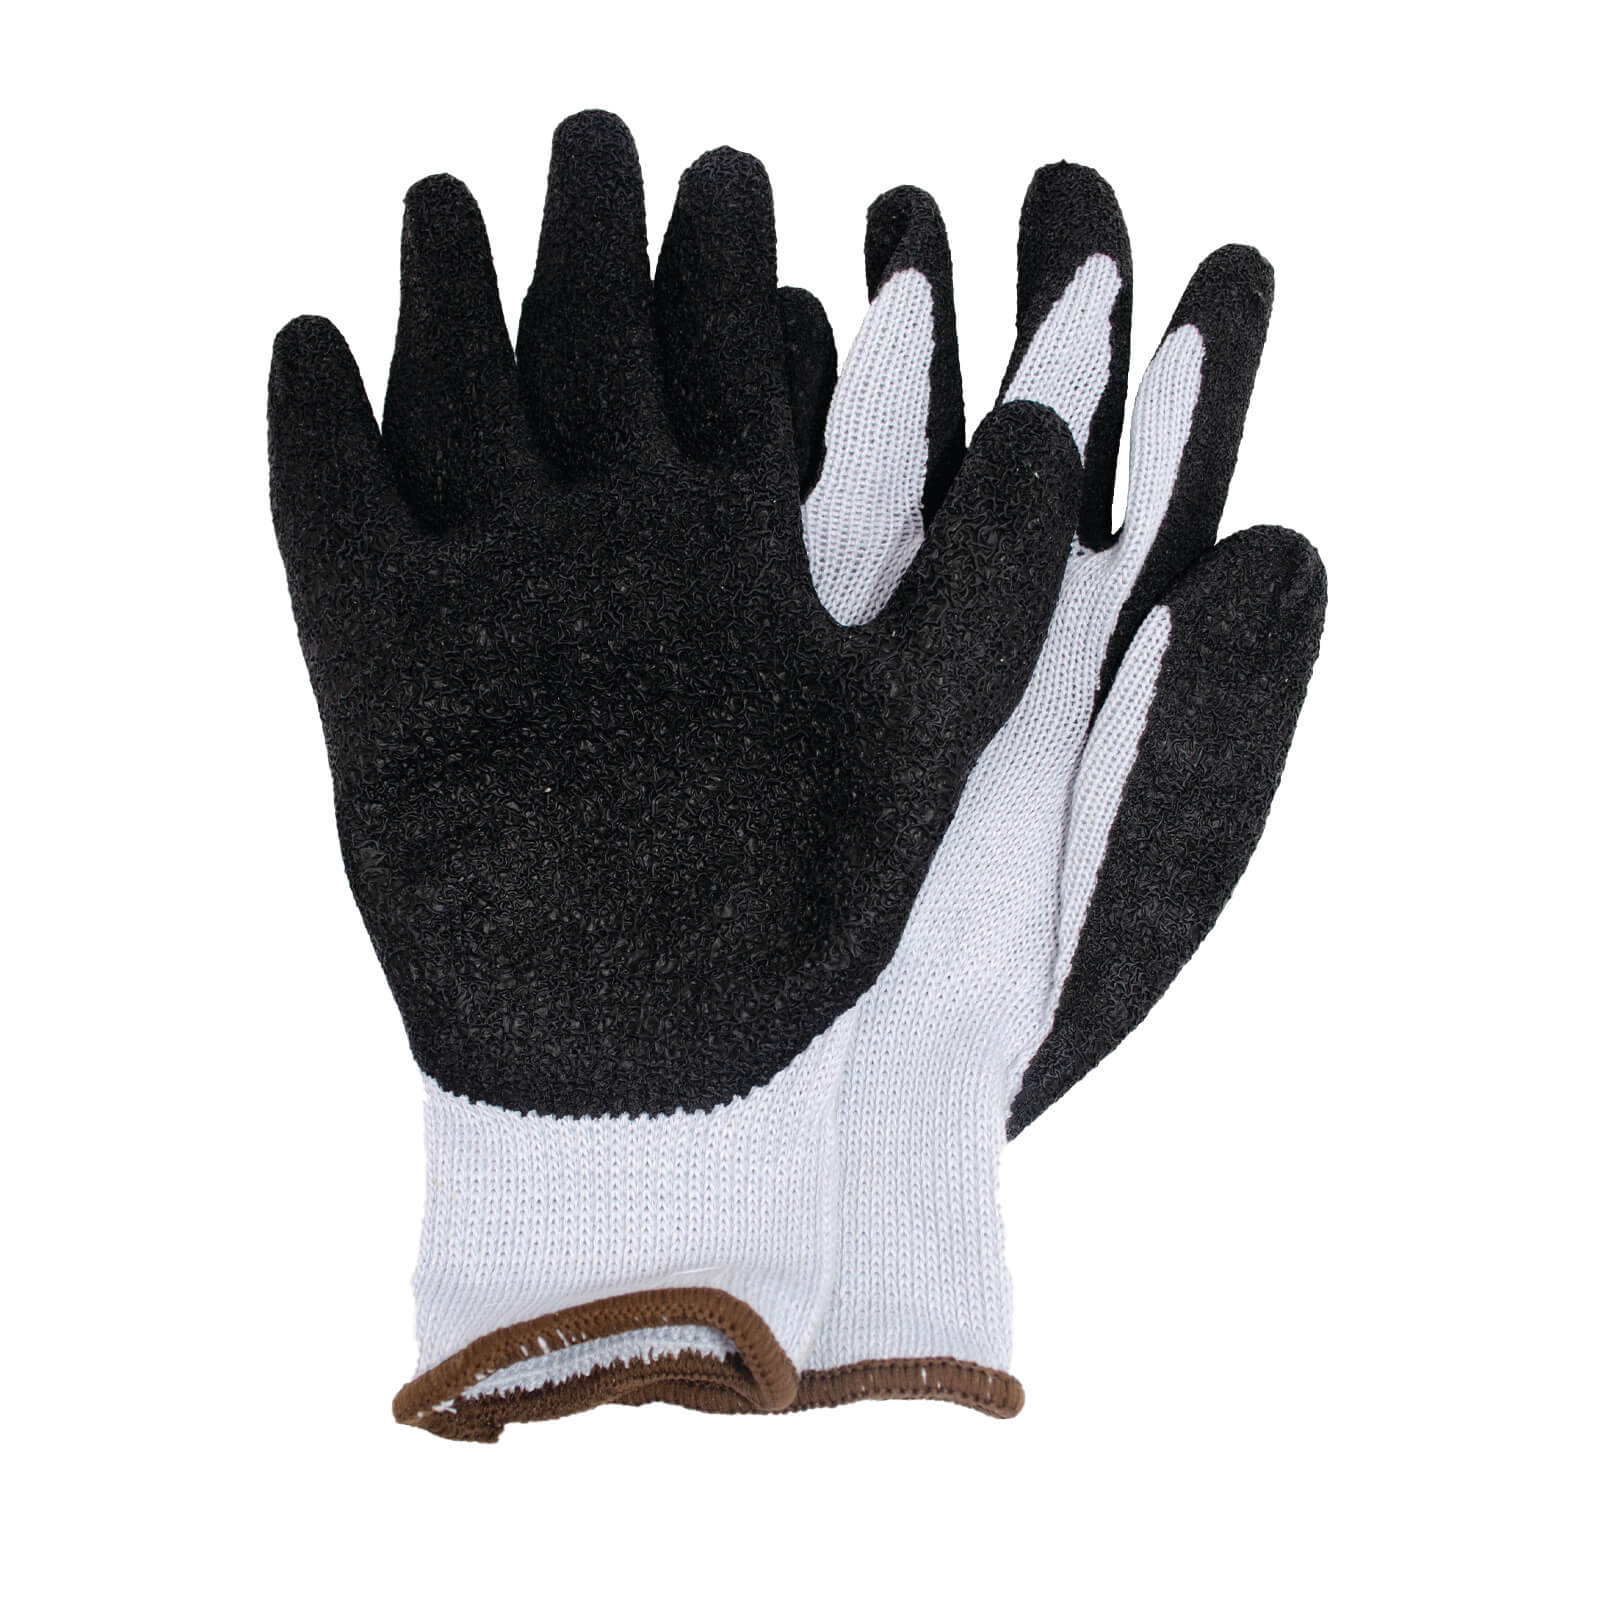 Big Mike by Stonebreaker Latex Dip Work Gloves - Large/Extra Large